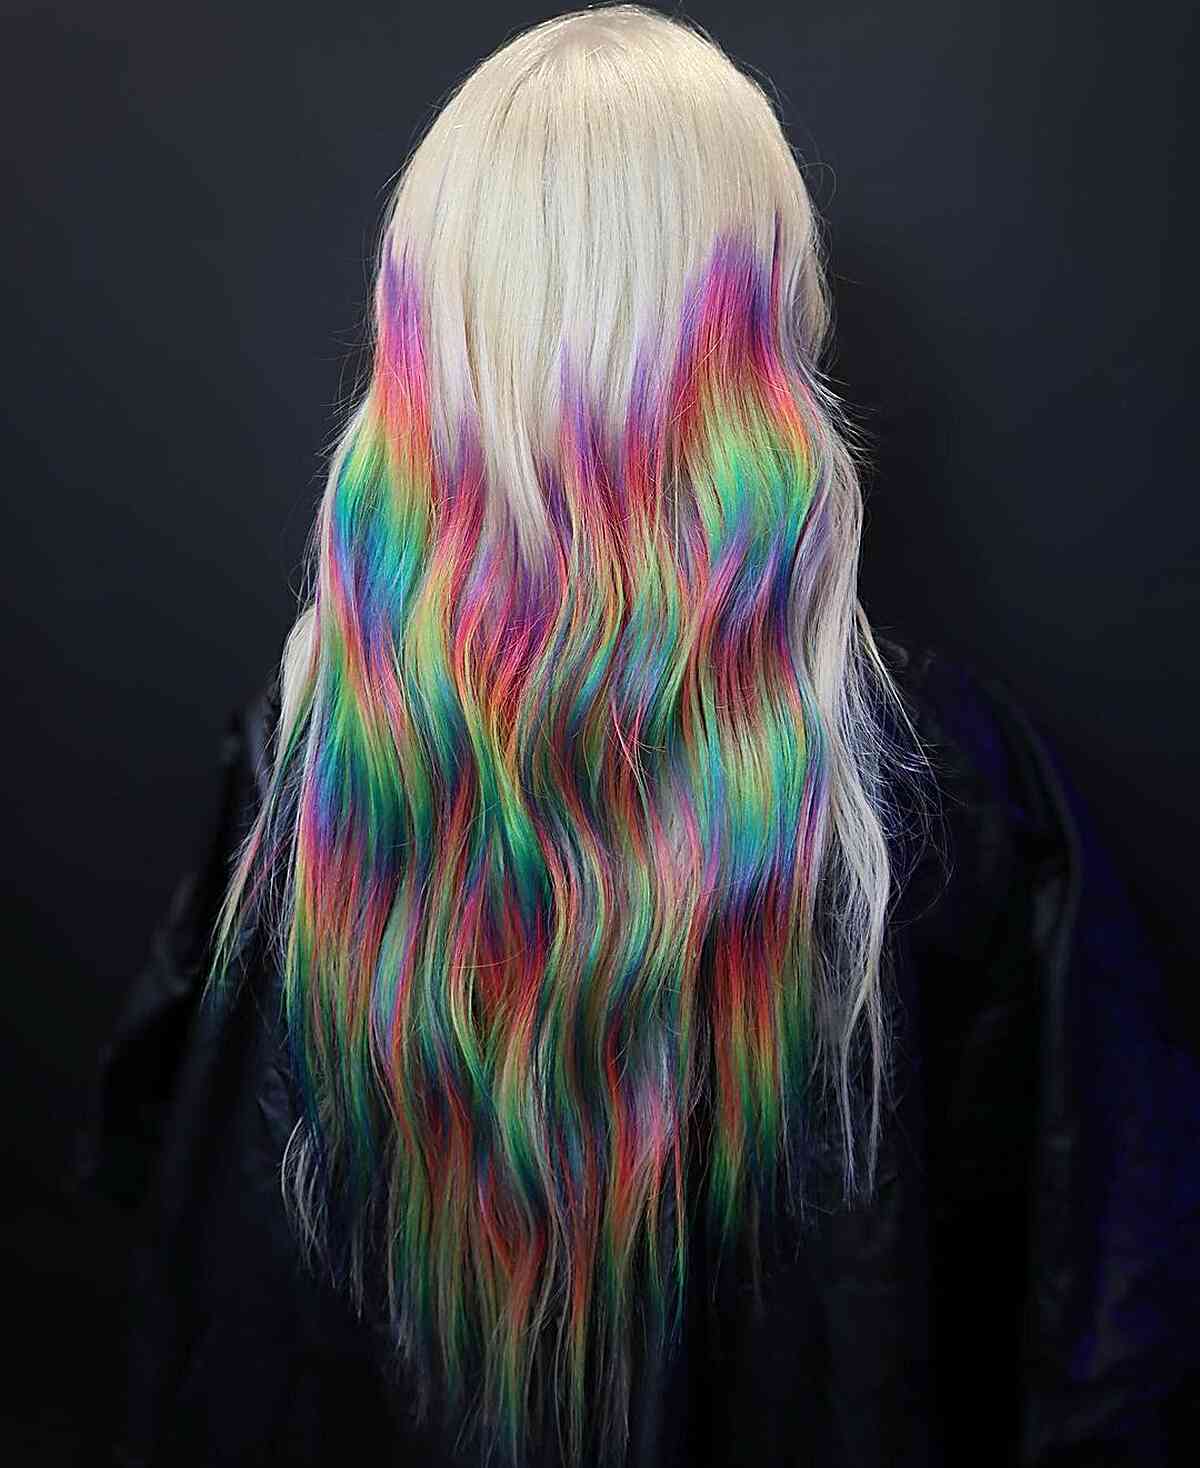 Neon Pops of Rainbow on White Hair for women with an vibrant, edgy style